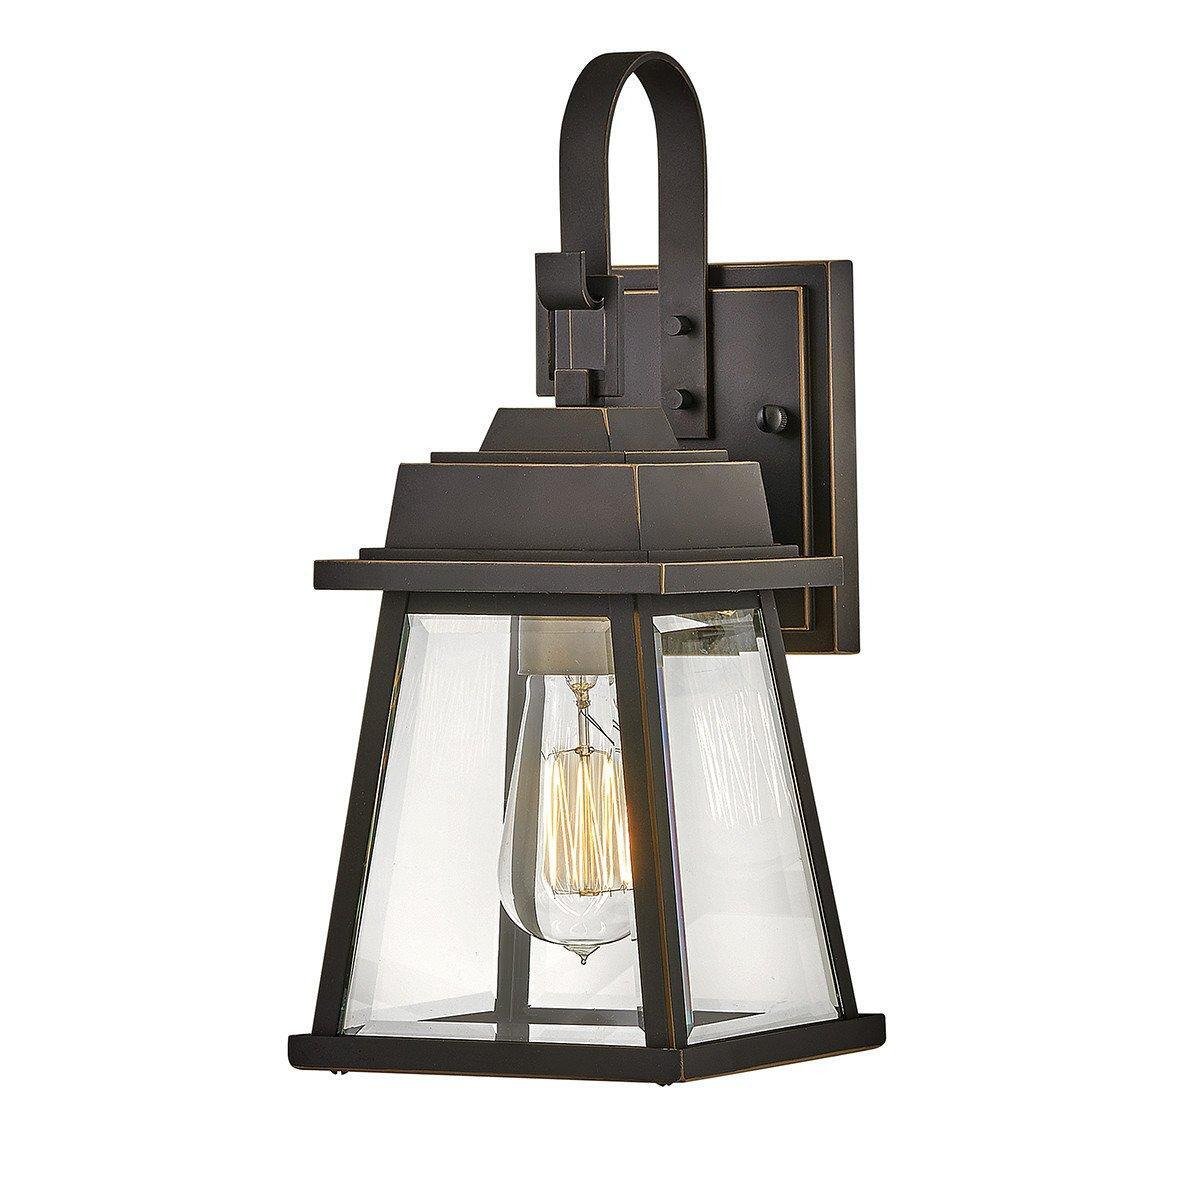 Hinkley Bainbridge Outdoor Wall Lantern Oil Rubbed Bronze with Heritage Brass Accents IP44 - image 1